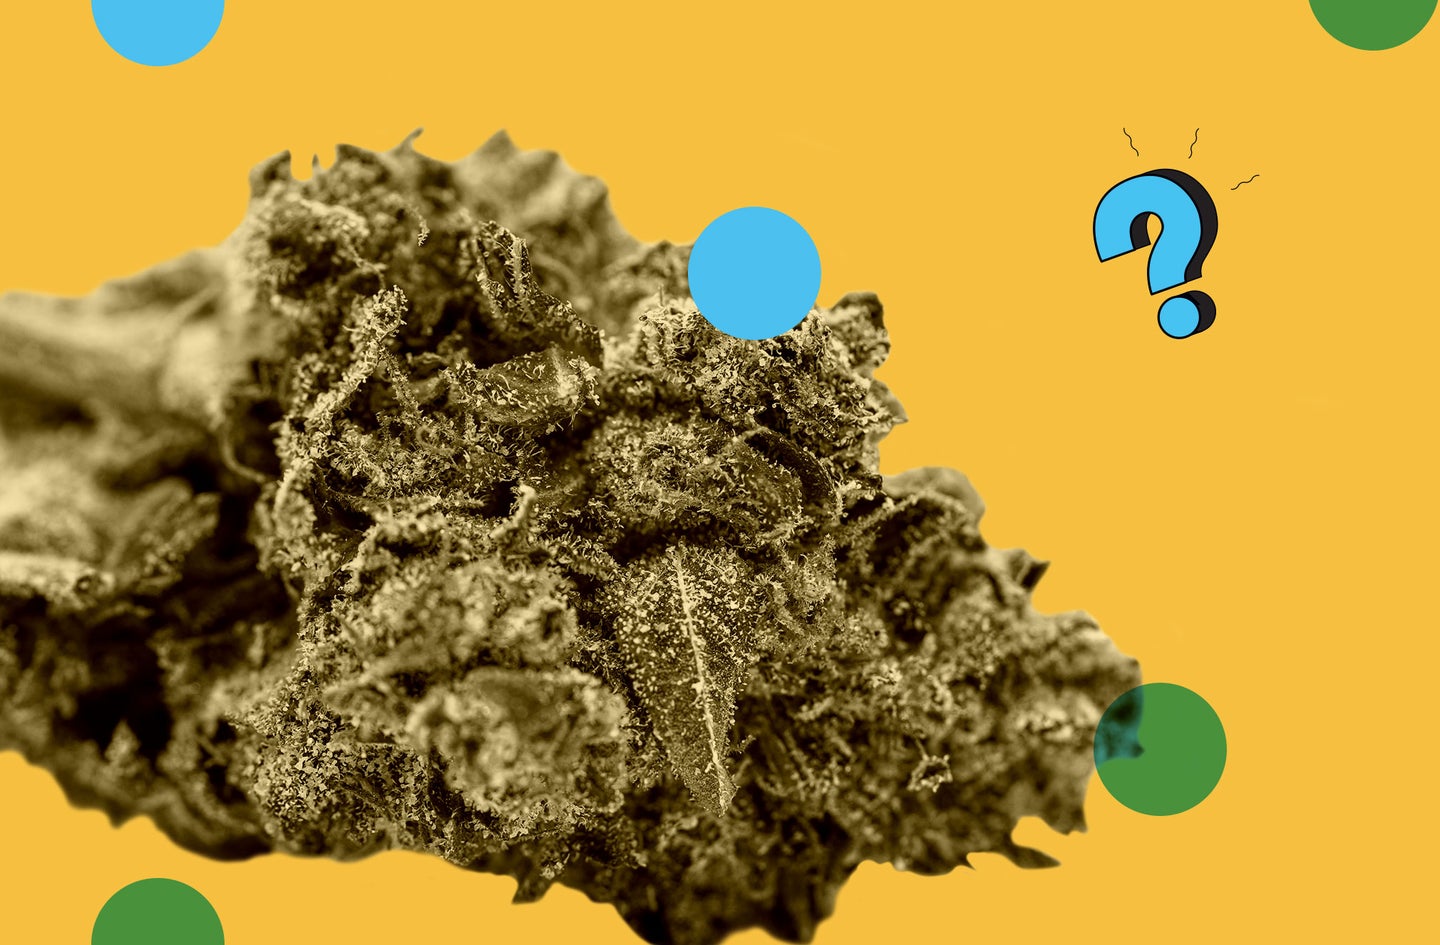 Marijuana over top of the Ask Us Anything logo